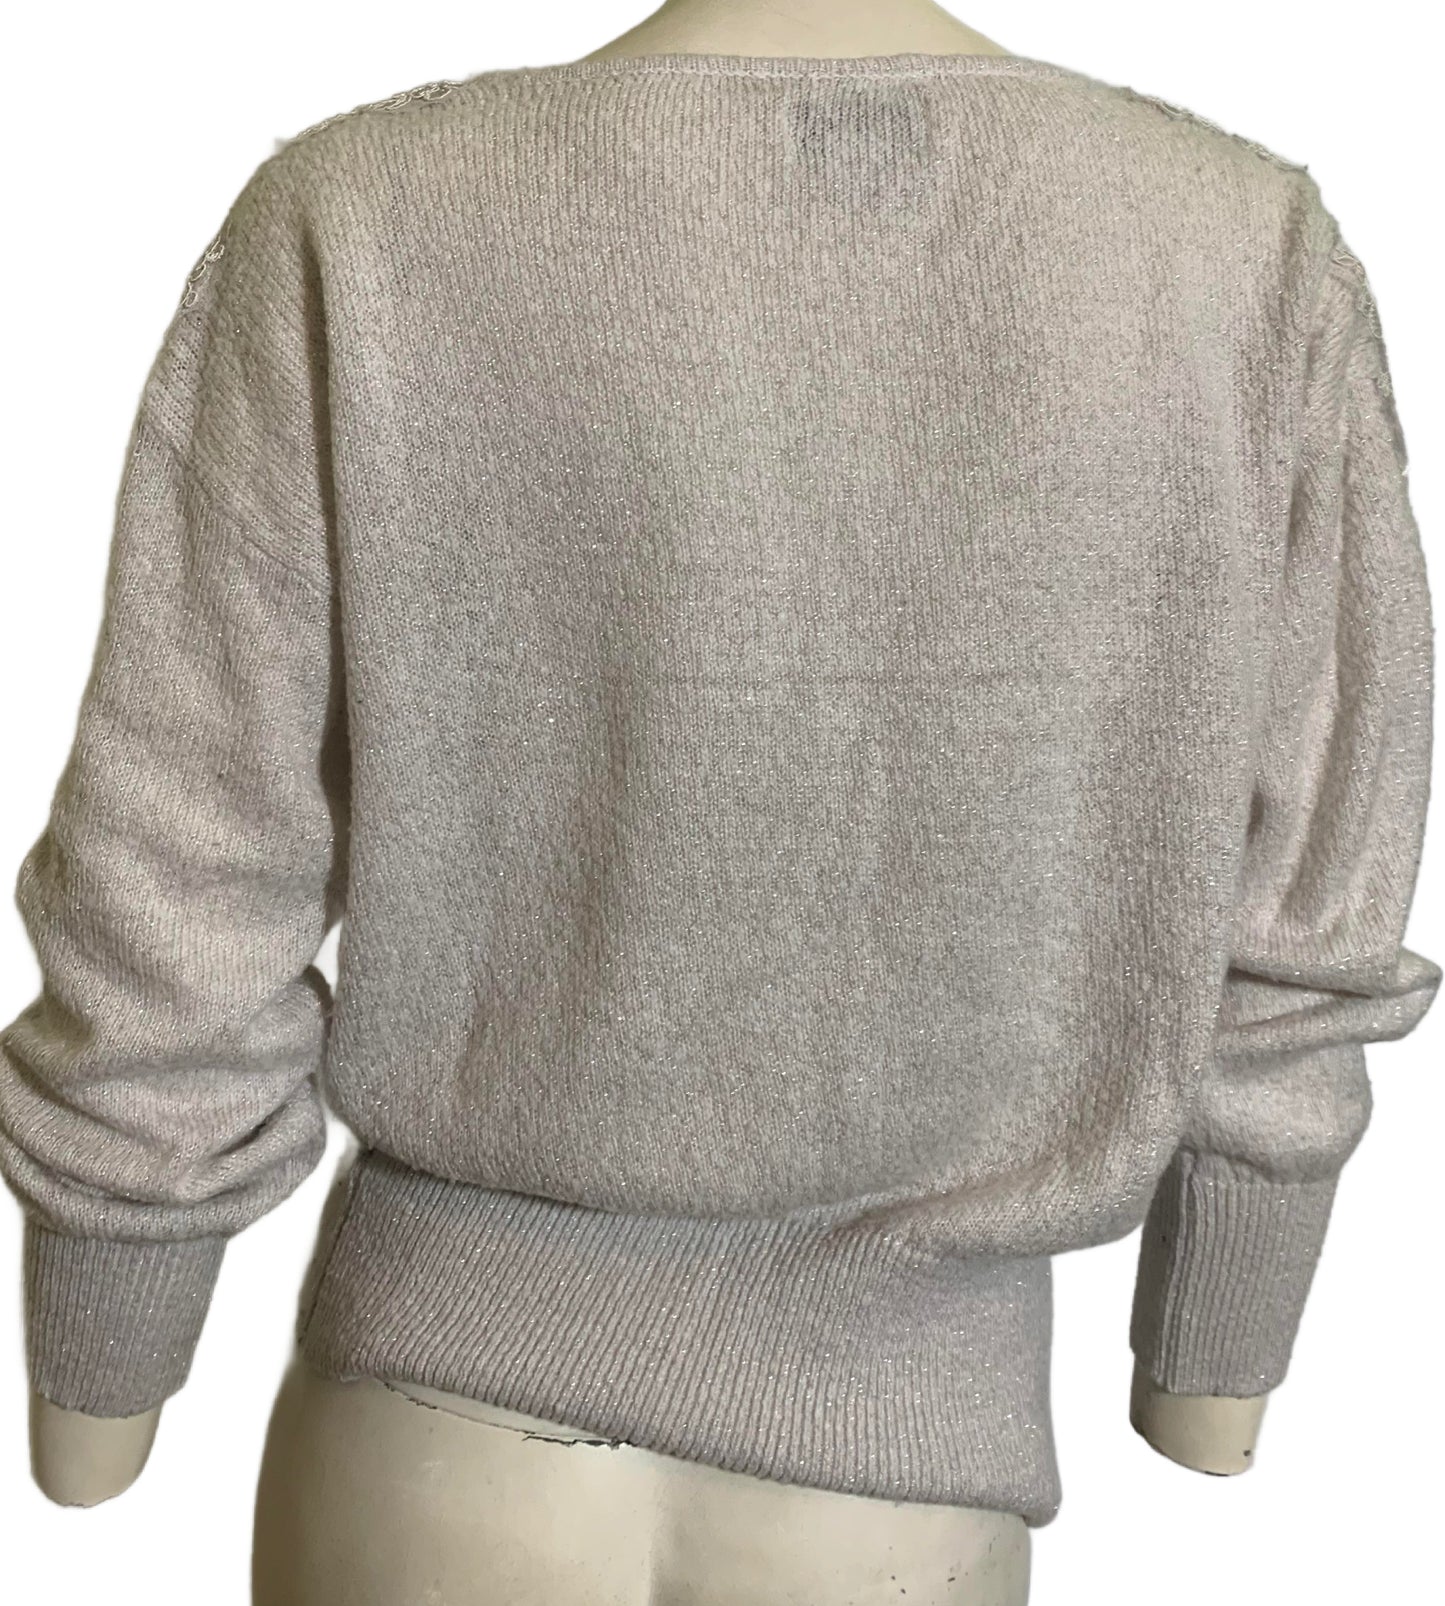 Silver Long Sleeved Beaded Sweater circa 1980s